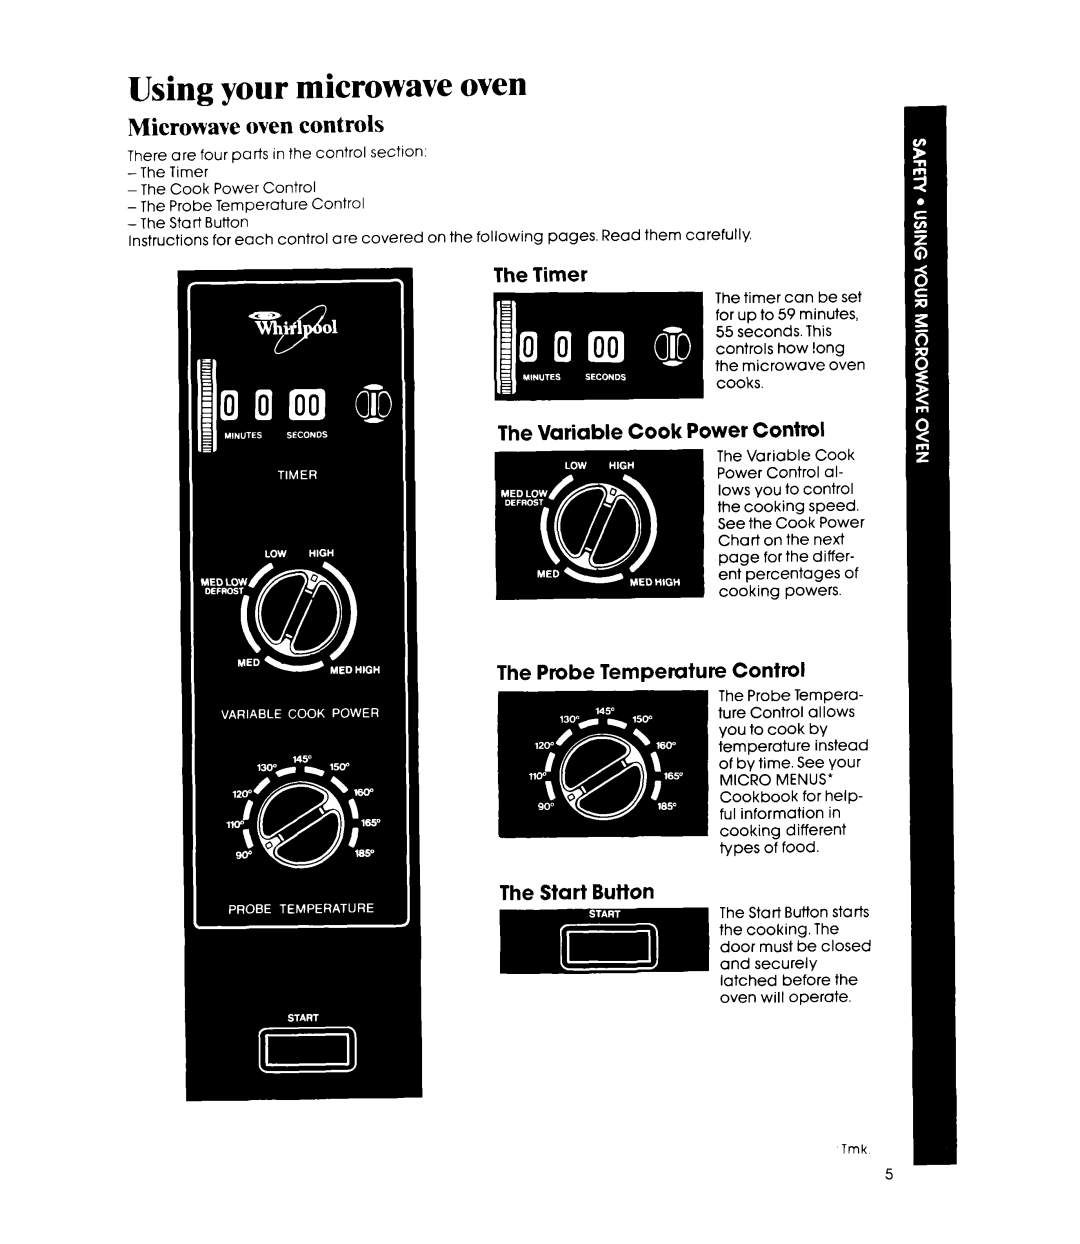 Whirlpool MW8450XP Using your microwave oven, Microwave oven controls, The Variable Cook Power Contml, The Start Button 